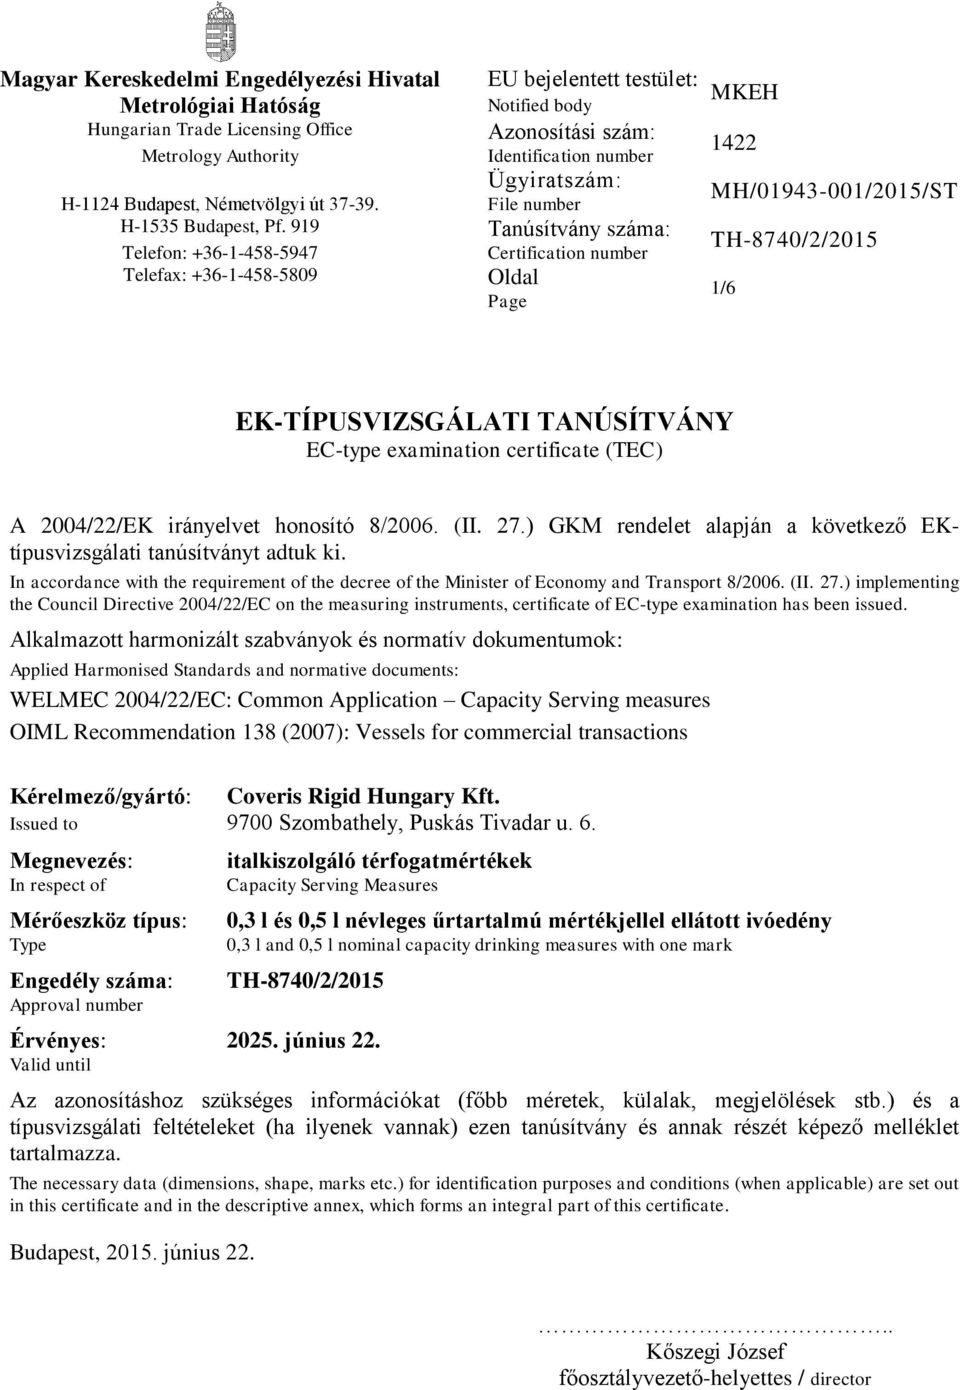 8/2006. (II. 27.) GKM rendelet alapján a következő EKtípusvizsgálati tanúsítványt adtuk ki. In accordance with the requirement of the decree of the Minister of Economy and Transport 8/2006. (II. 27.) implementing the Council Directive 2004/22/EC on the measuring instruments, certificate of EC-type examination has been issued.